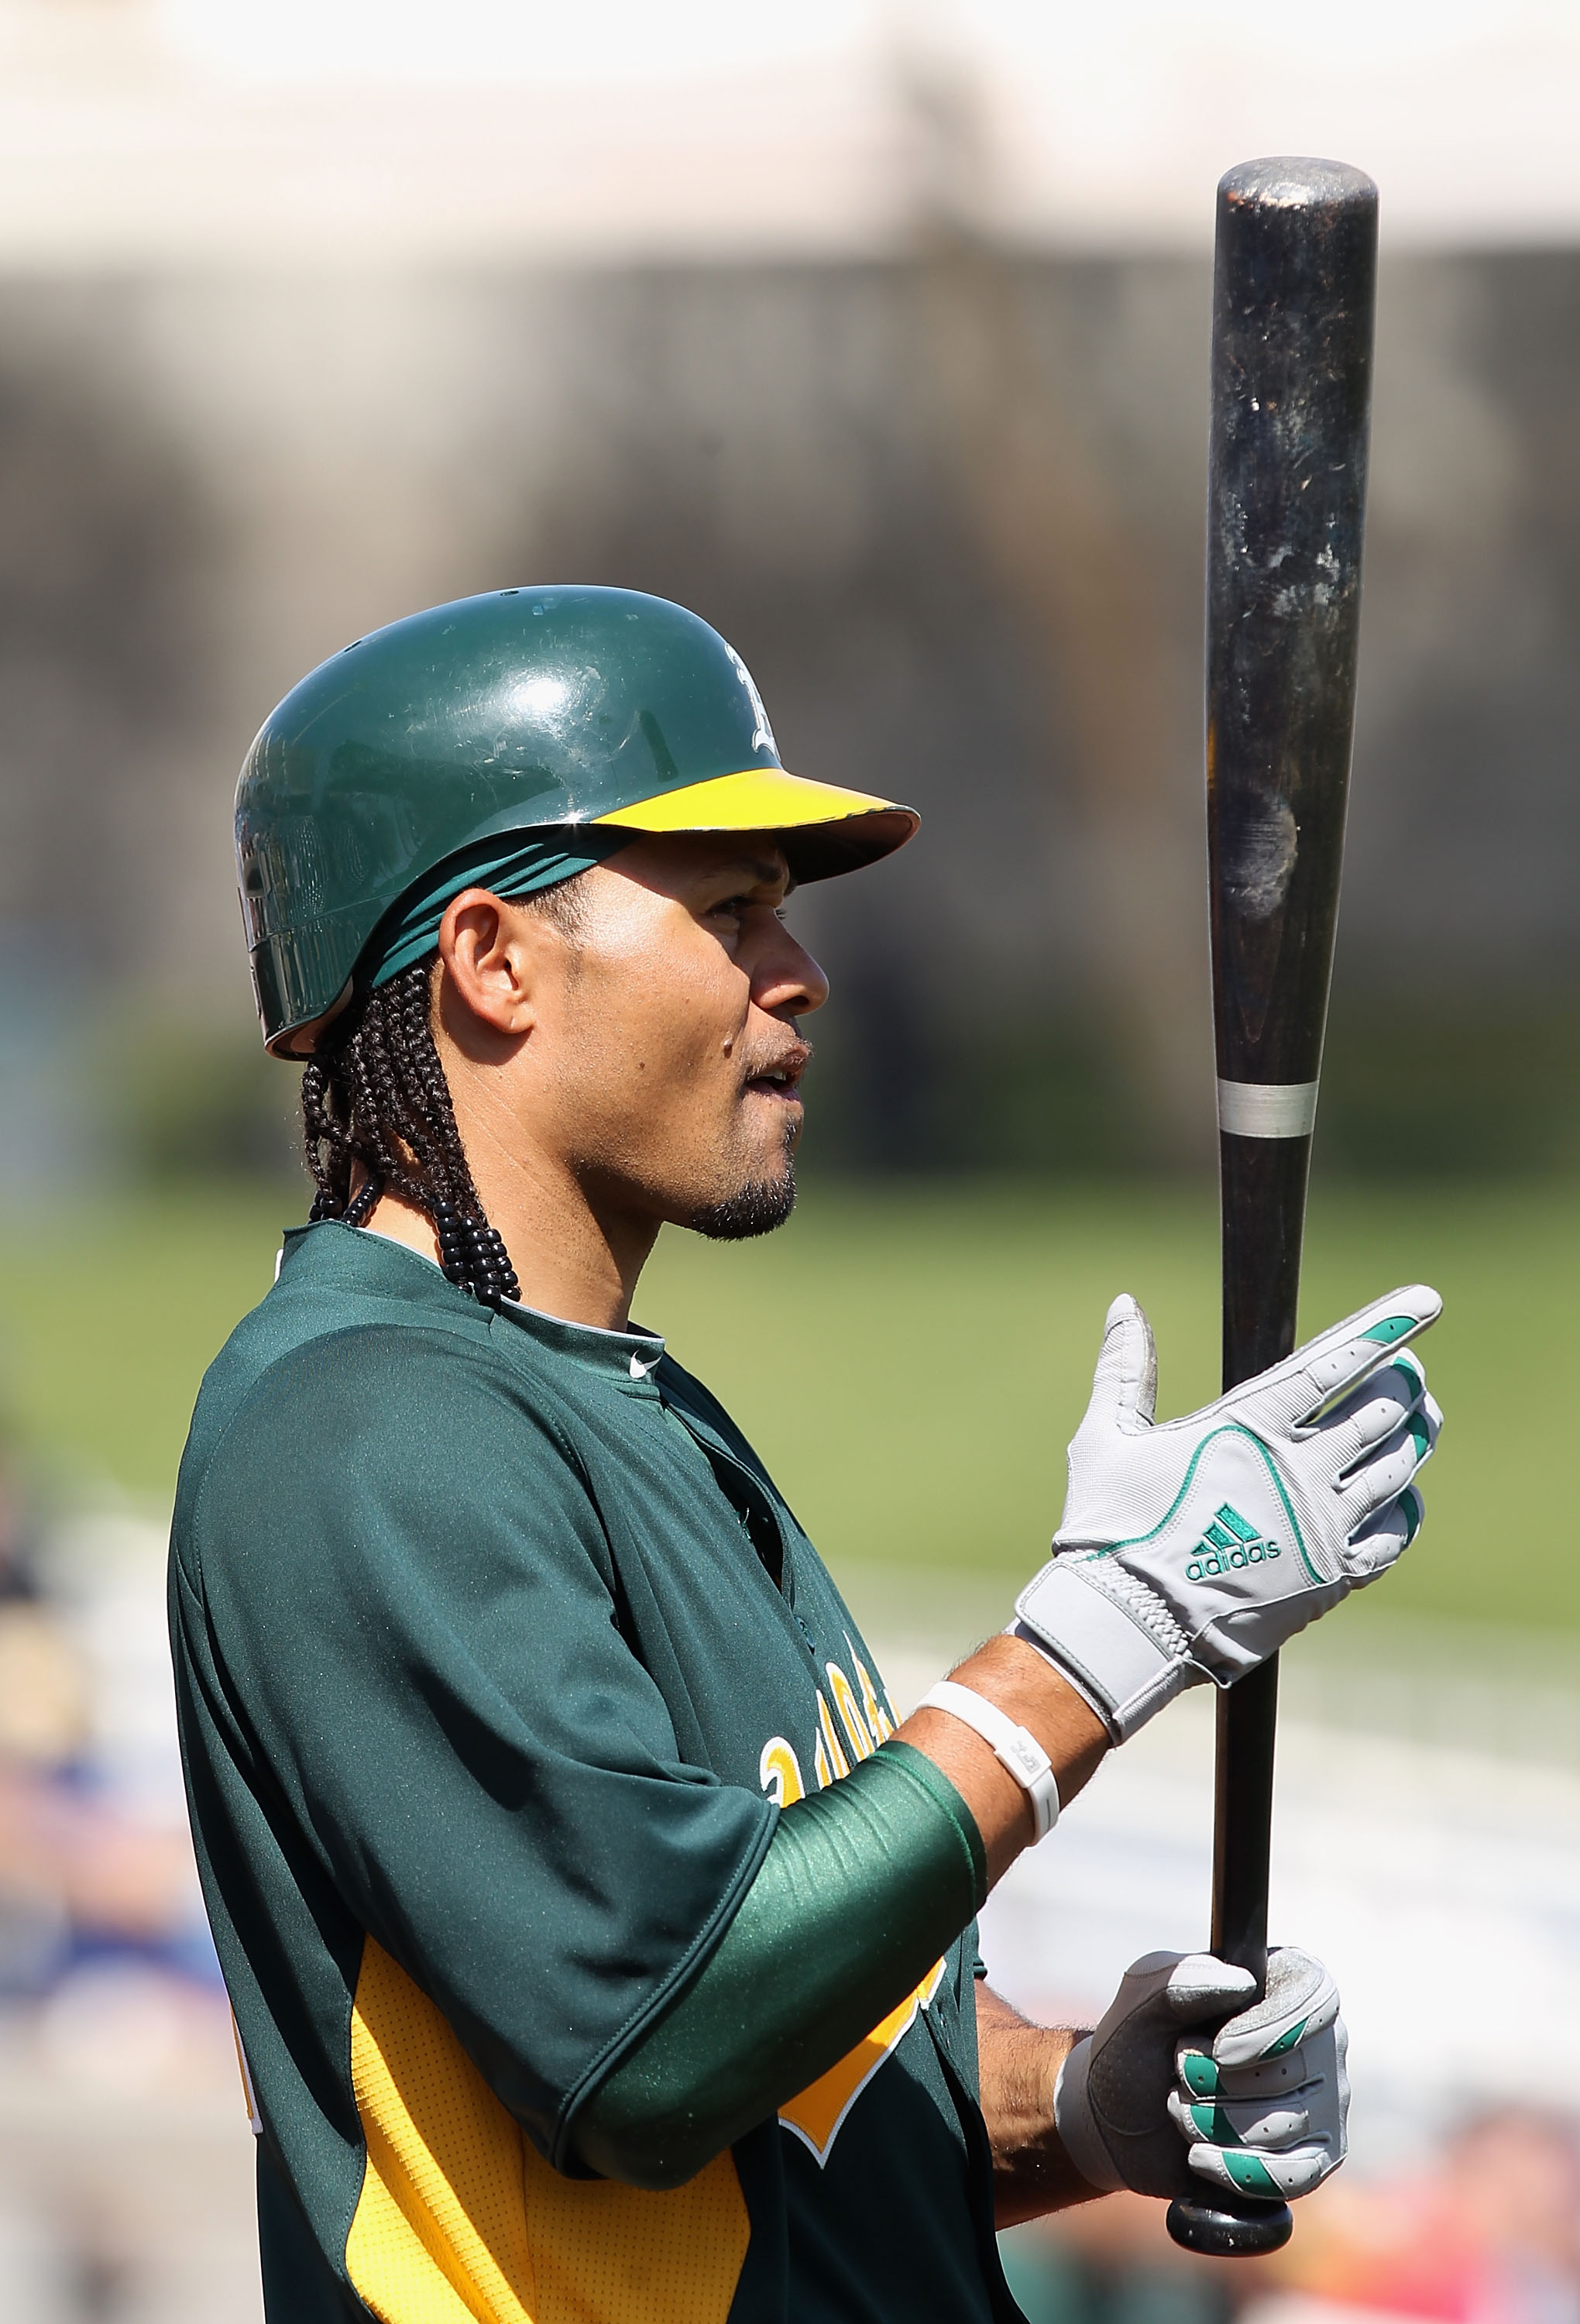 PHOENIX, AZ - MARCH 03:  Coco Crisp #4 of the Oakland Athletics prepares to bat during the spring training game against the Milwaukee Brewers at Maryvale Baseball Park on March 3, 2011 in Phoenix, Arizona.  (Photo by Christian Petersen/Getty Images)